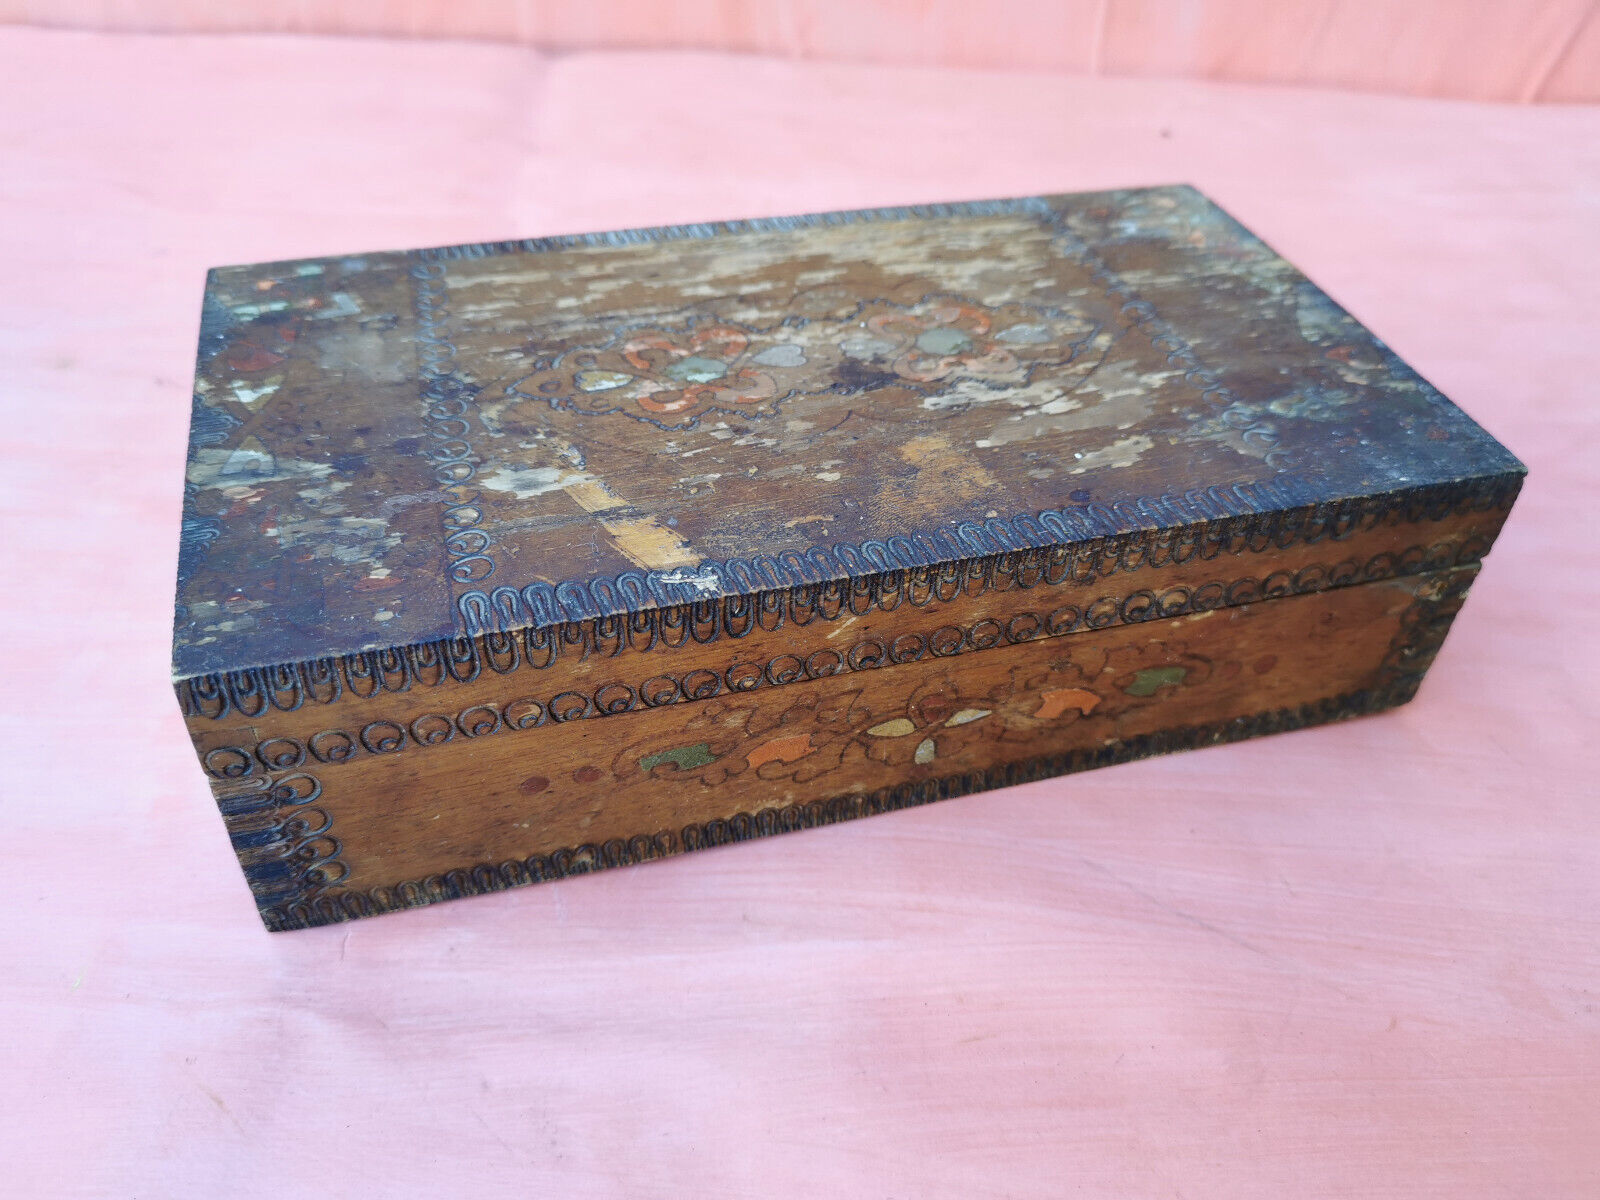 OLD PRIMITIVE VINTAGE  WOODEN HAND PAINTED PYROGRAPHY BOX CASE FOR DOCUMENTS